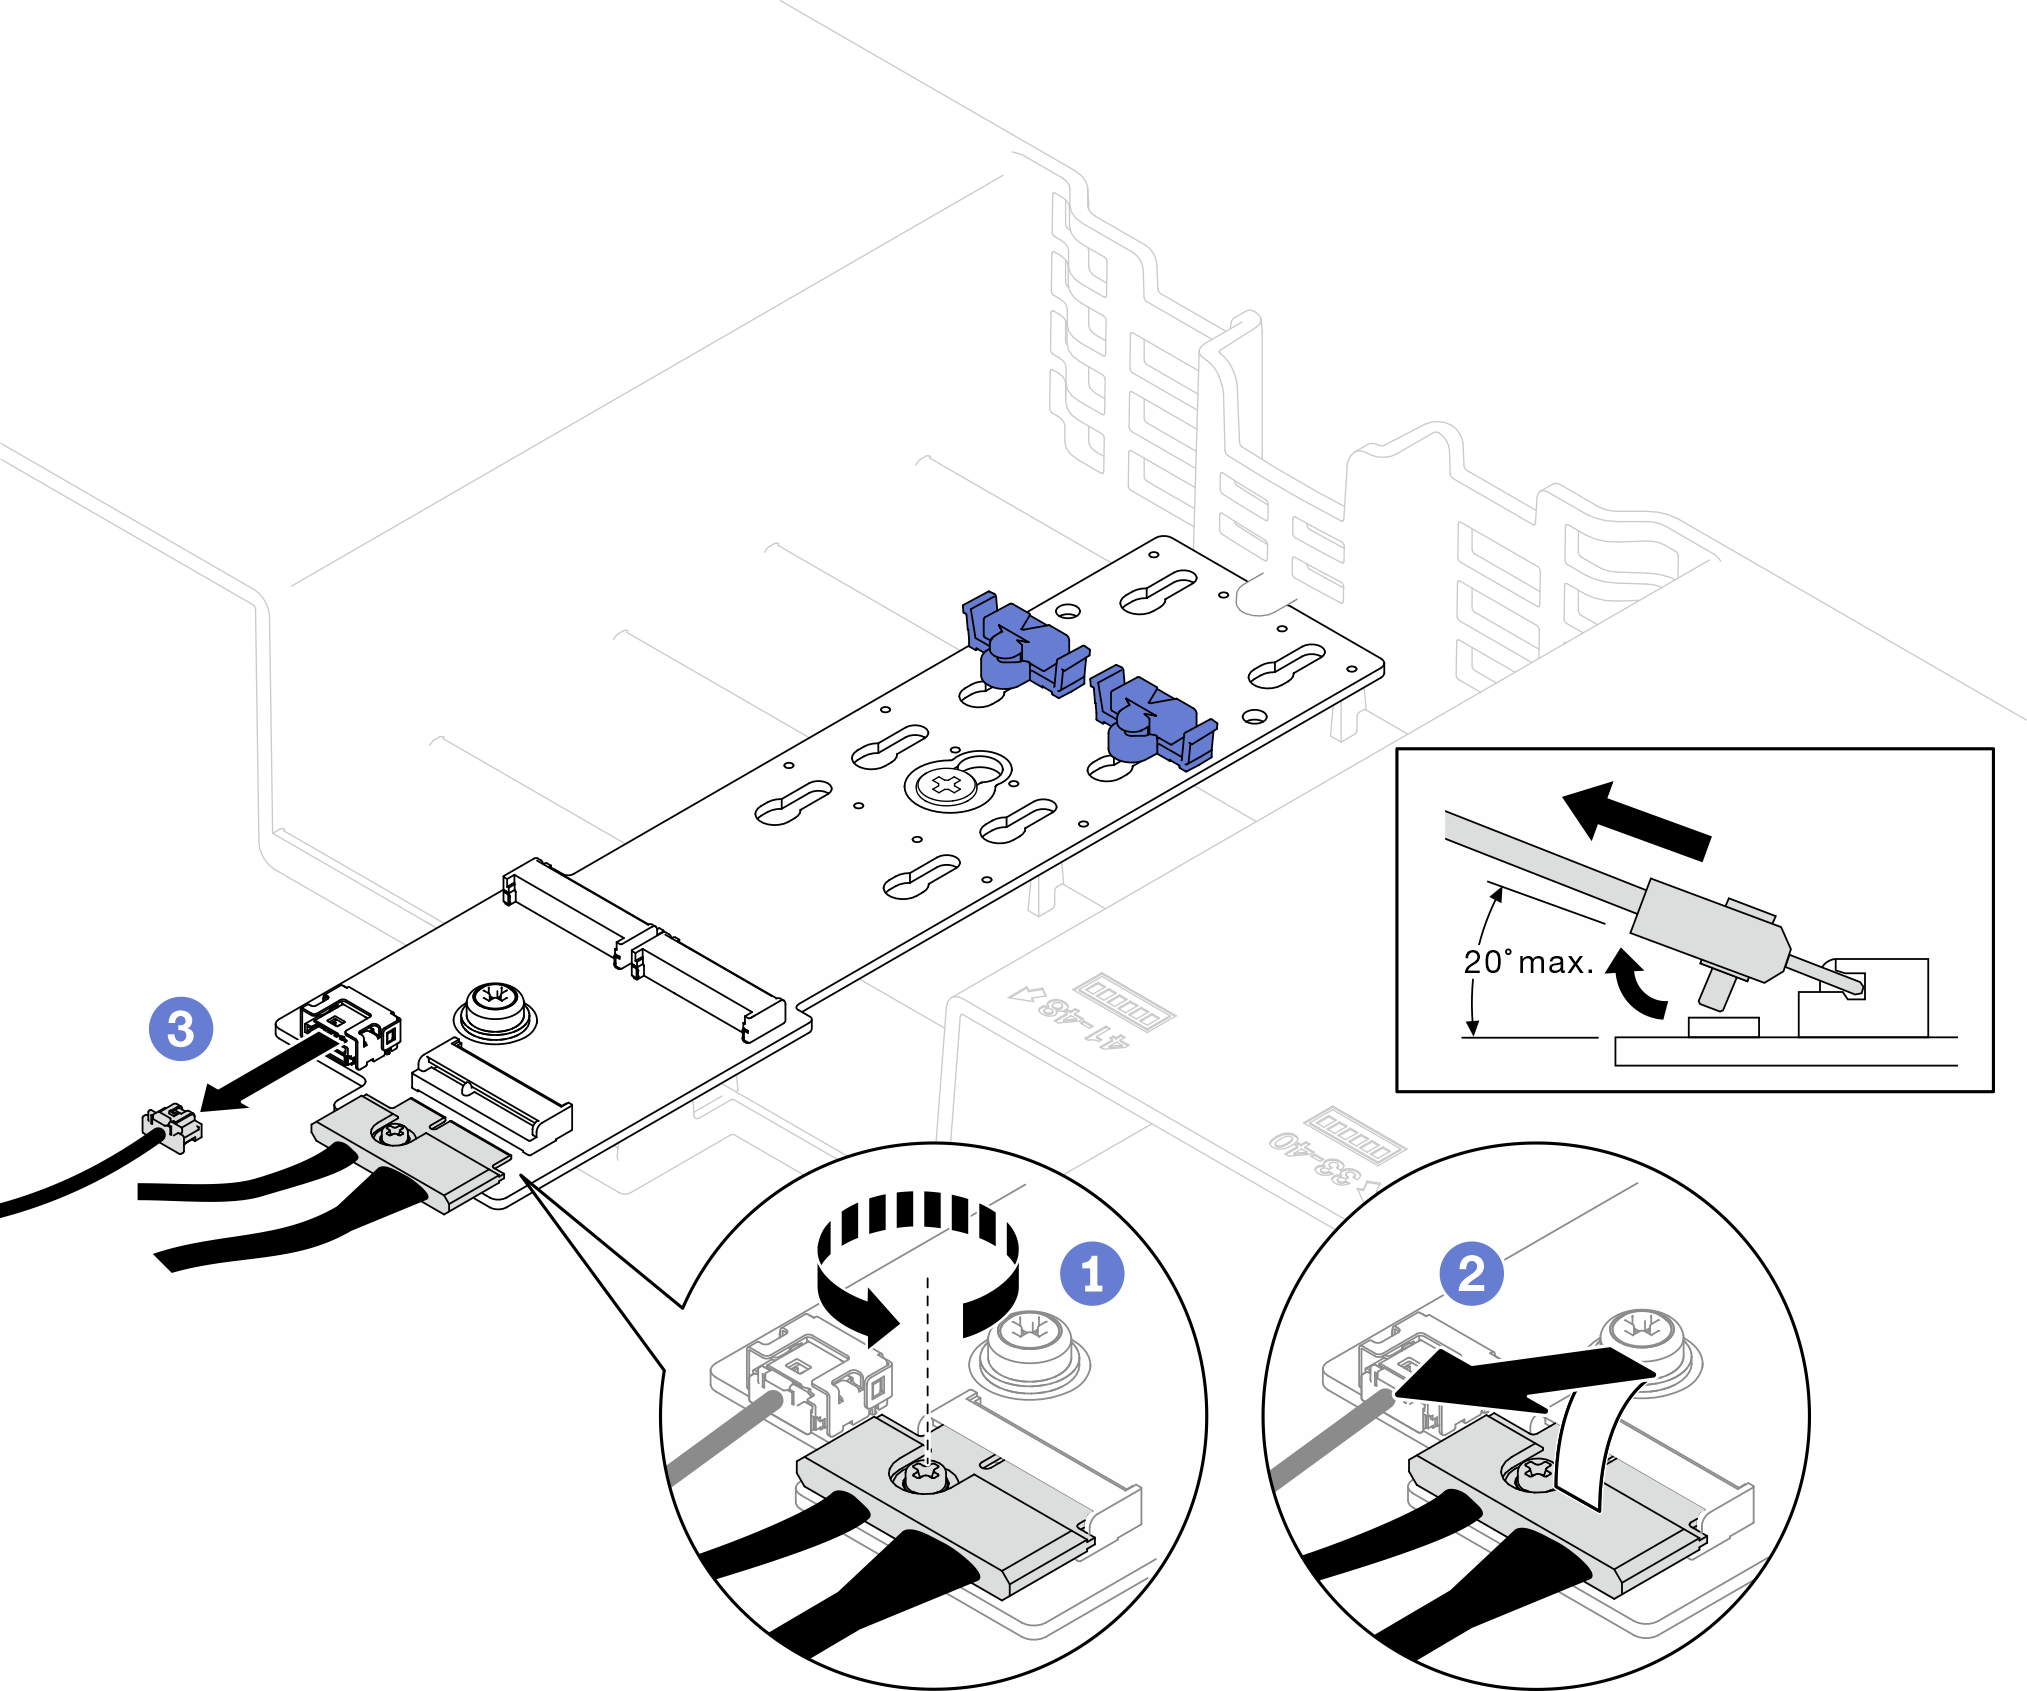 SATA/NVMe or NVMe M.2 backplane cable disconnection